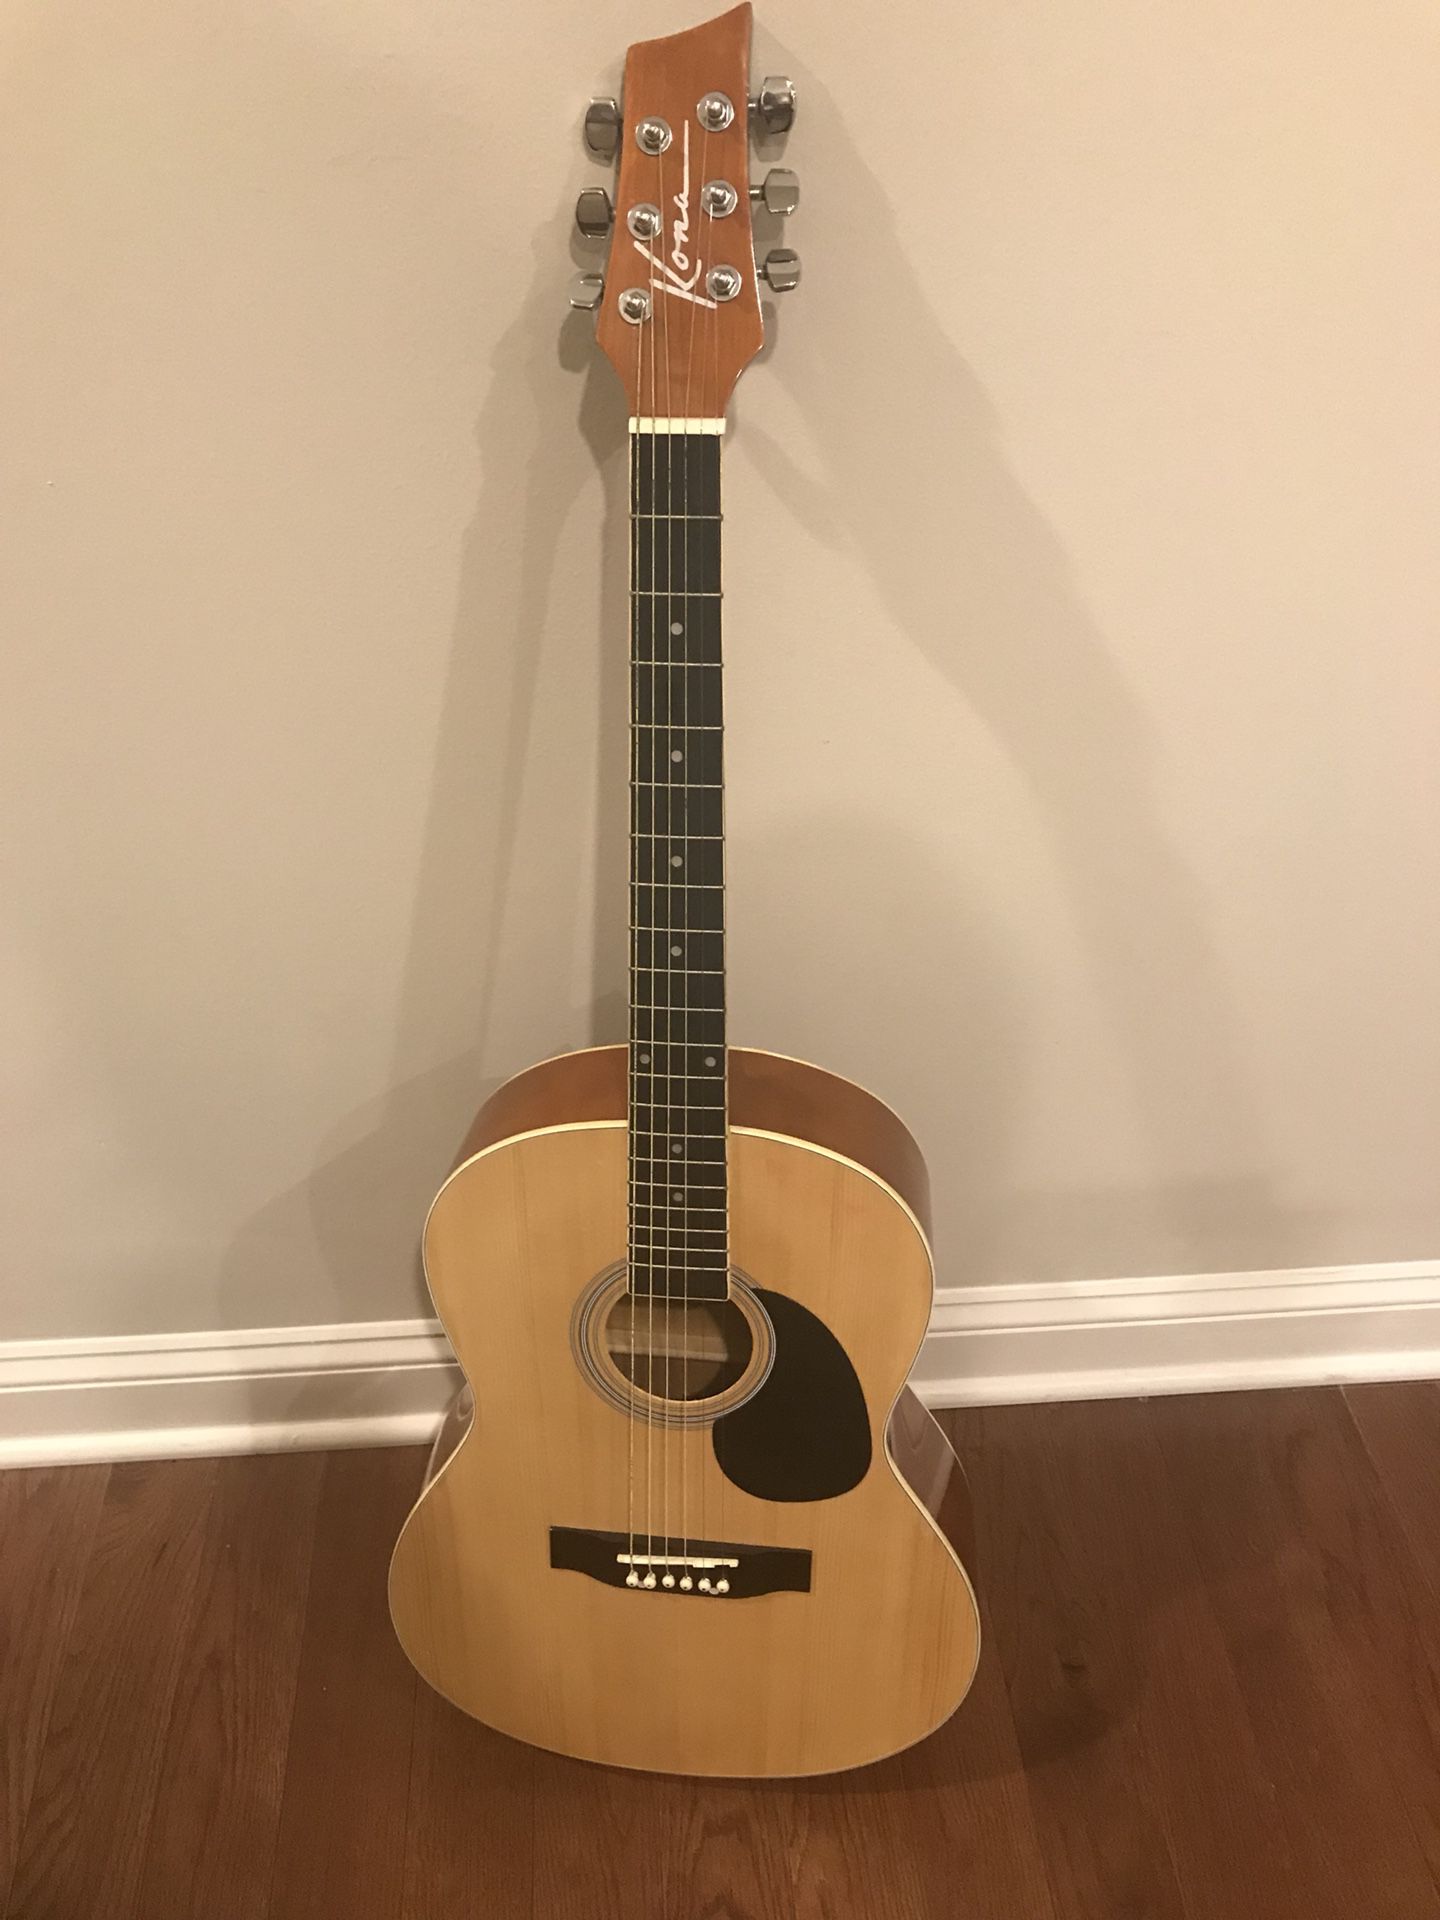 Stater guitar